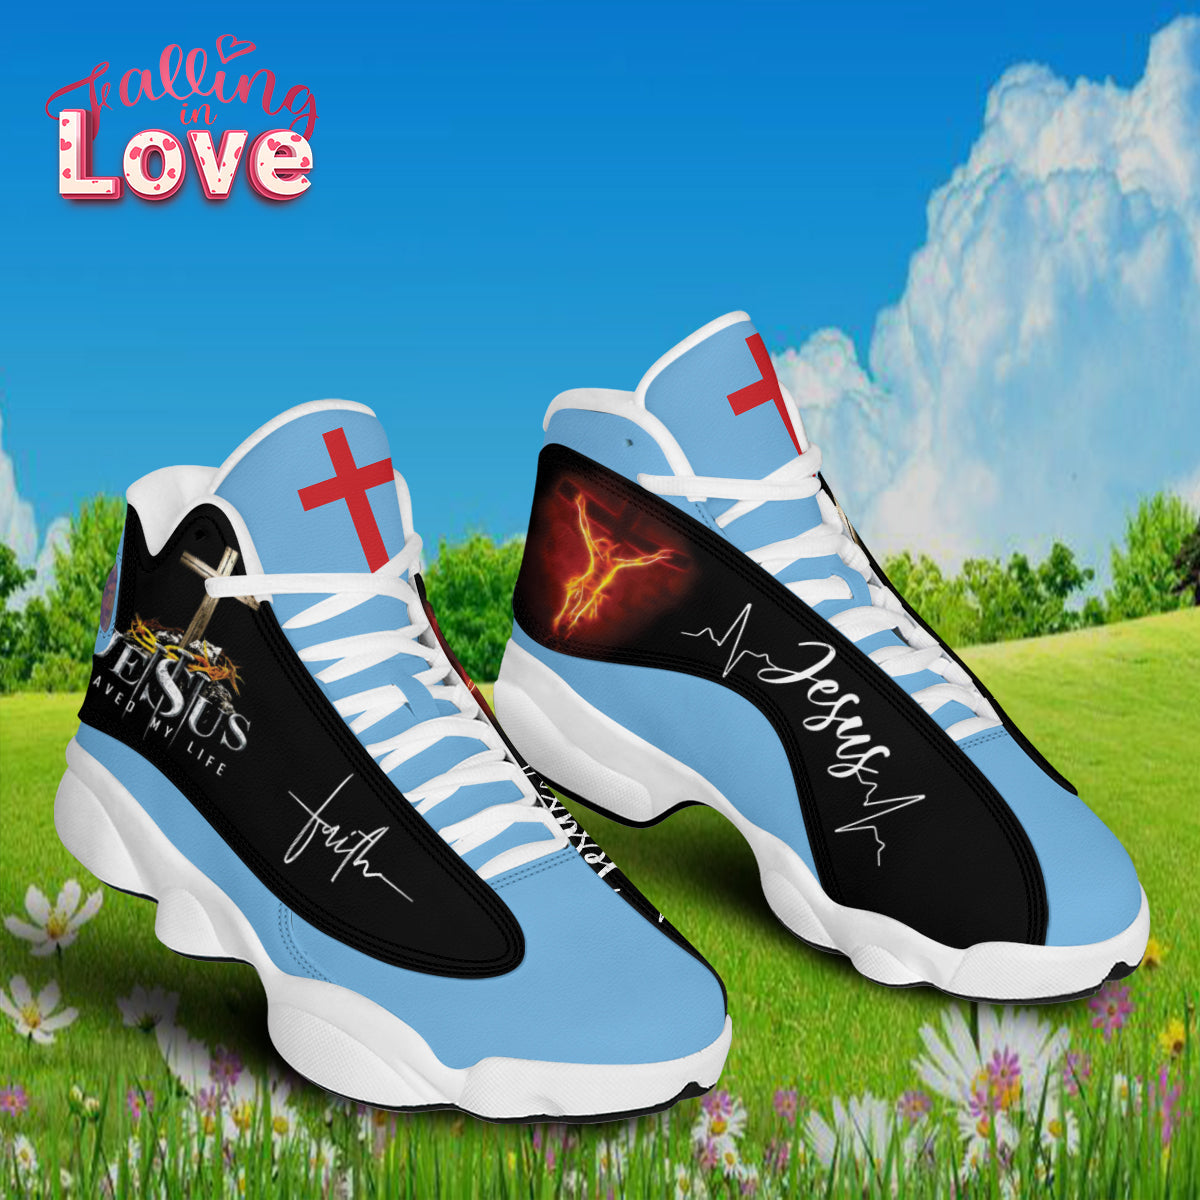 Jesus Saved My Life For Men Women - Christian Shoes - Jesus Shoes - Unisex Basketball Shoes